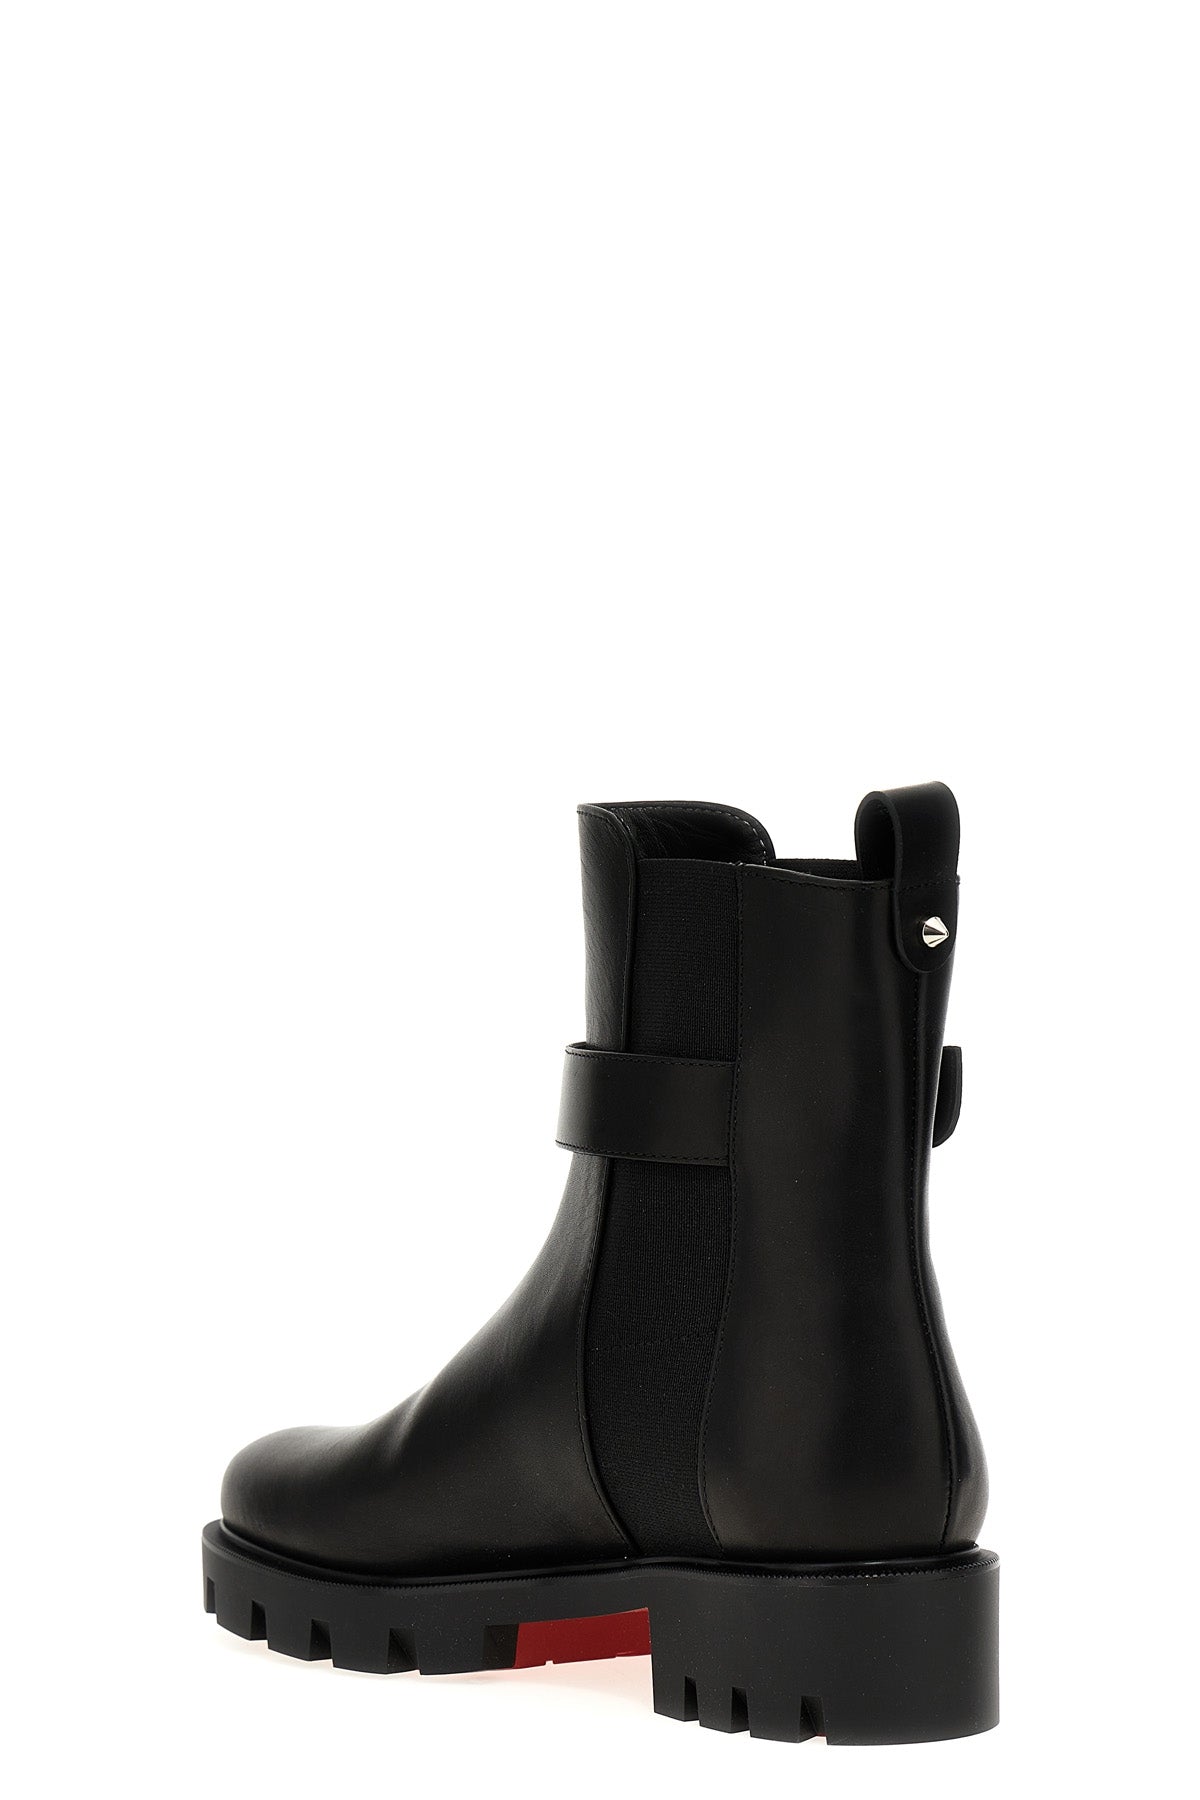 CHRISTIAN LOUBOUTIN 'CL CHELSEA BOOTY LUG' ANKLE BOOTS